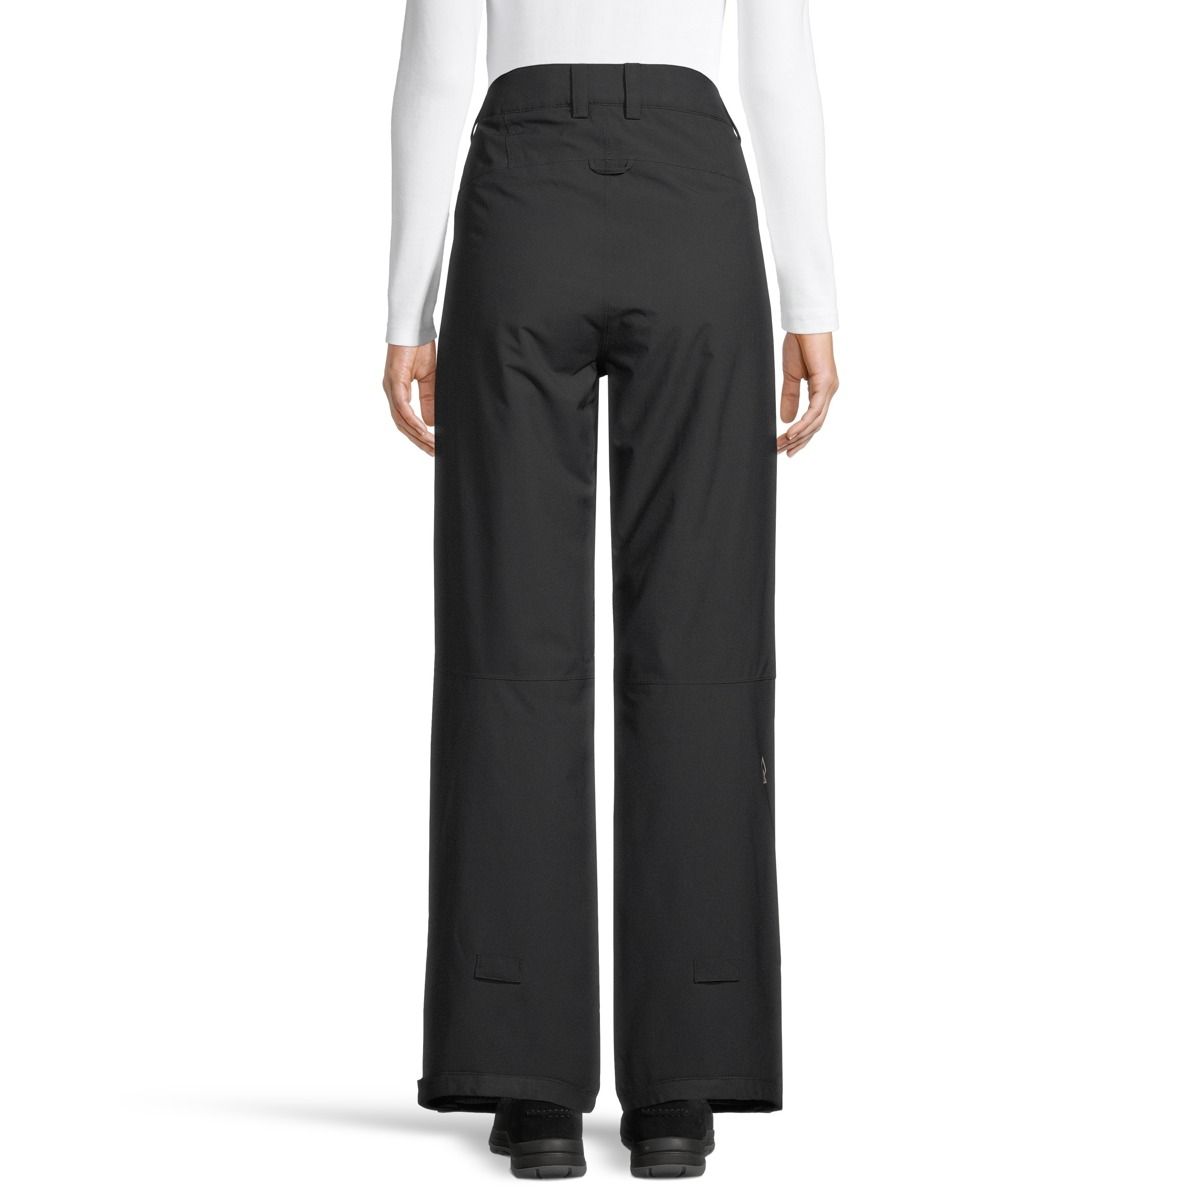 https://media-www.sportchek.ca/product/div-03-softgoods/dpt-76-outerwear/sdpt-02-womens/334115232/ripzone-w-caledon-ins-snow-pant-f23-0923-blk-06658aab-7676-48d5-82aa-d804bc5b7d66-jpgrendition.jpg?imdensity=1&imwidth=1244&impolicy=mZoom